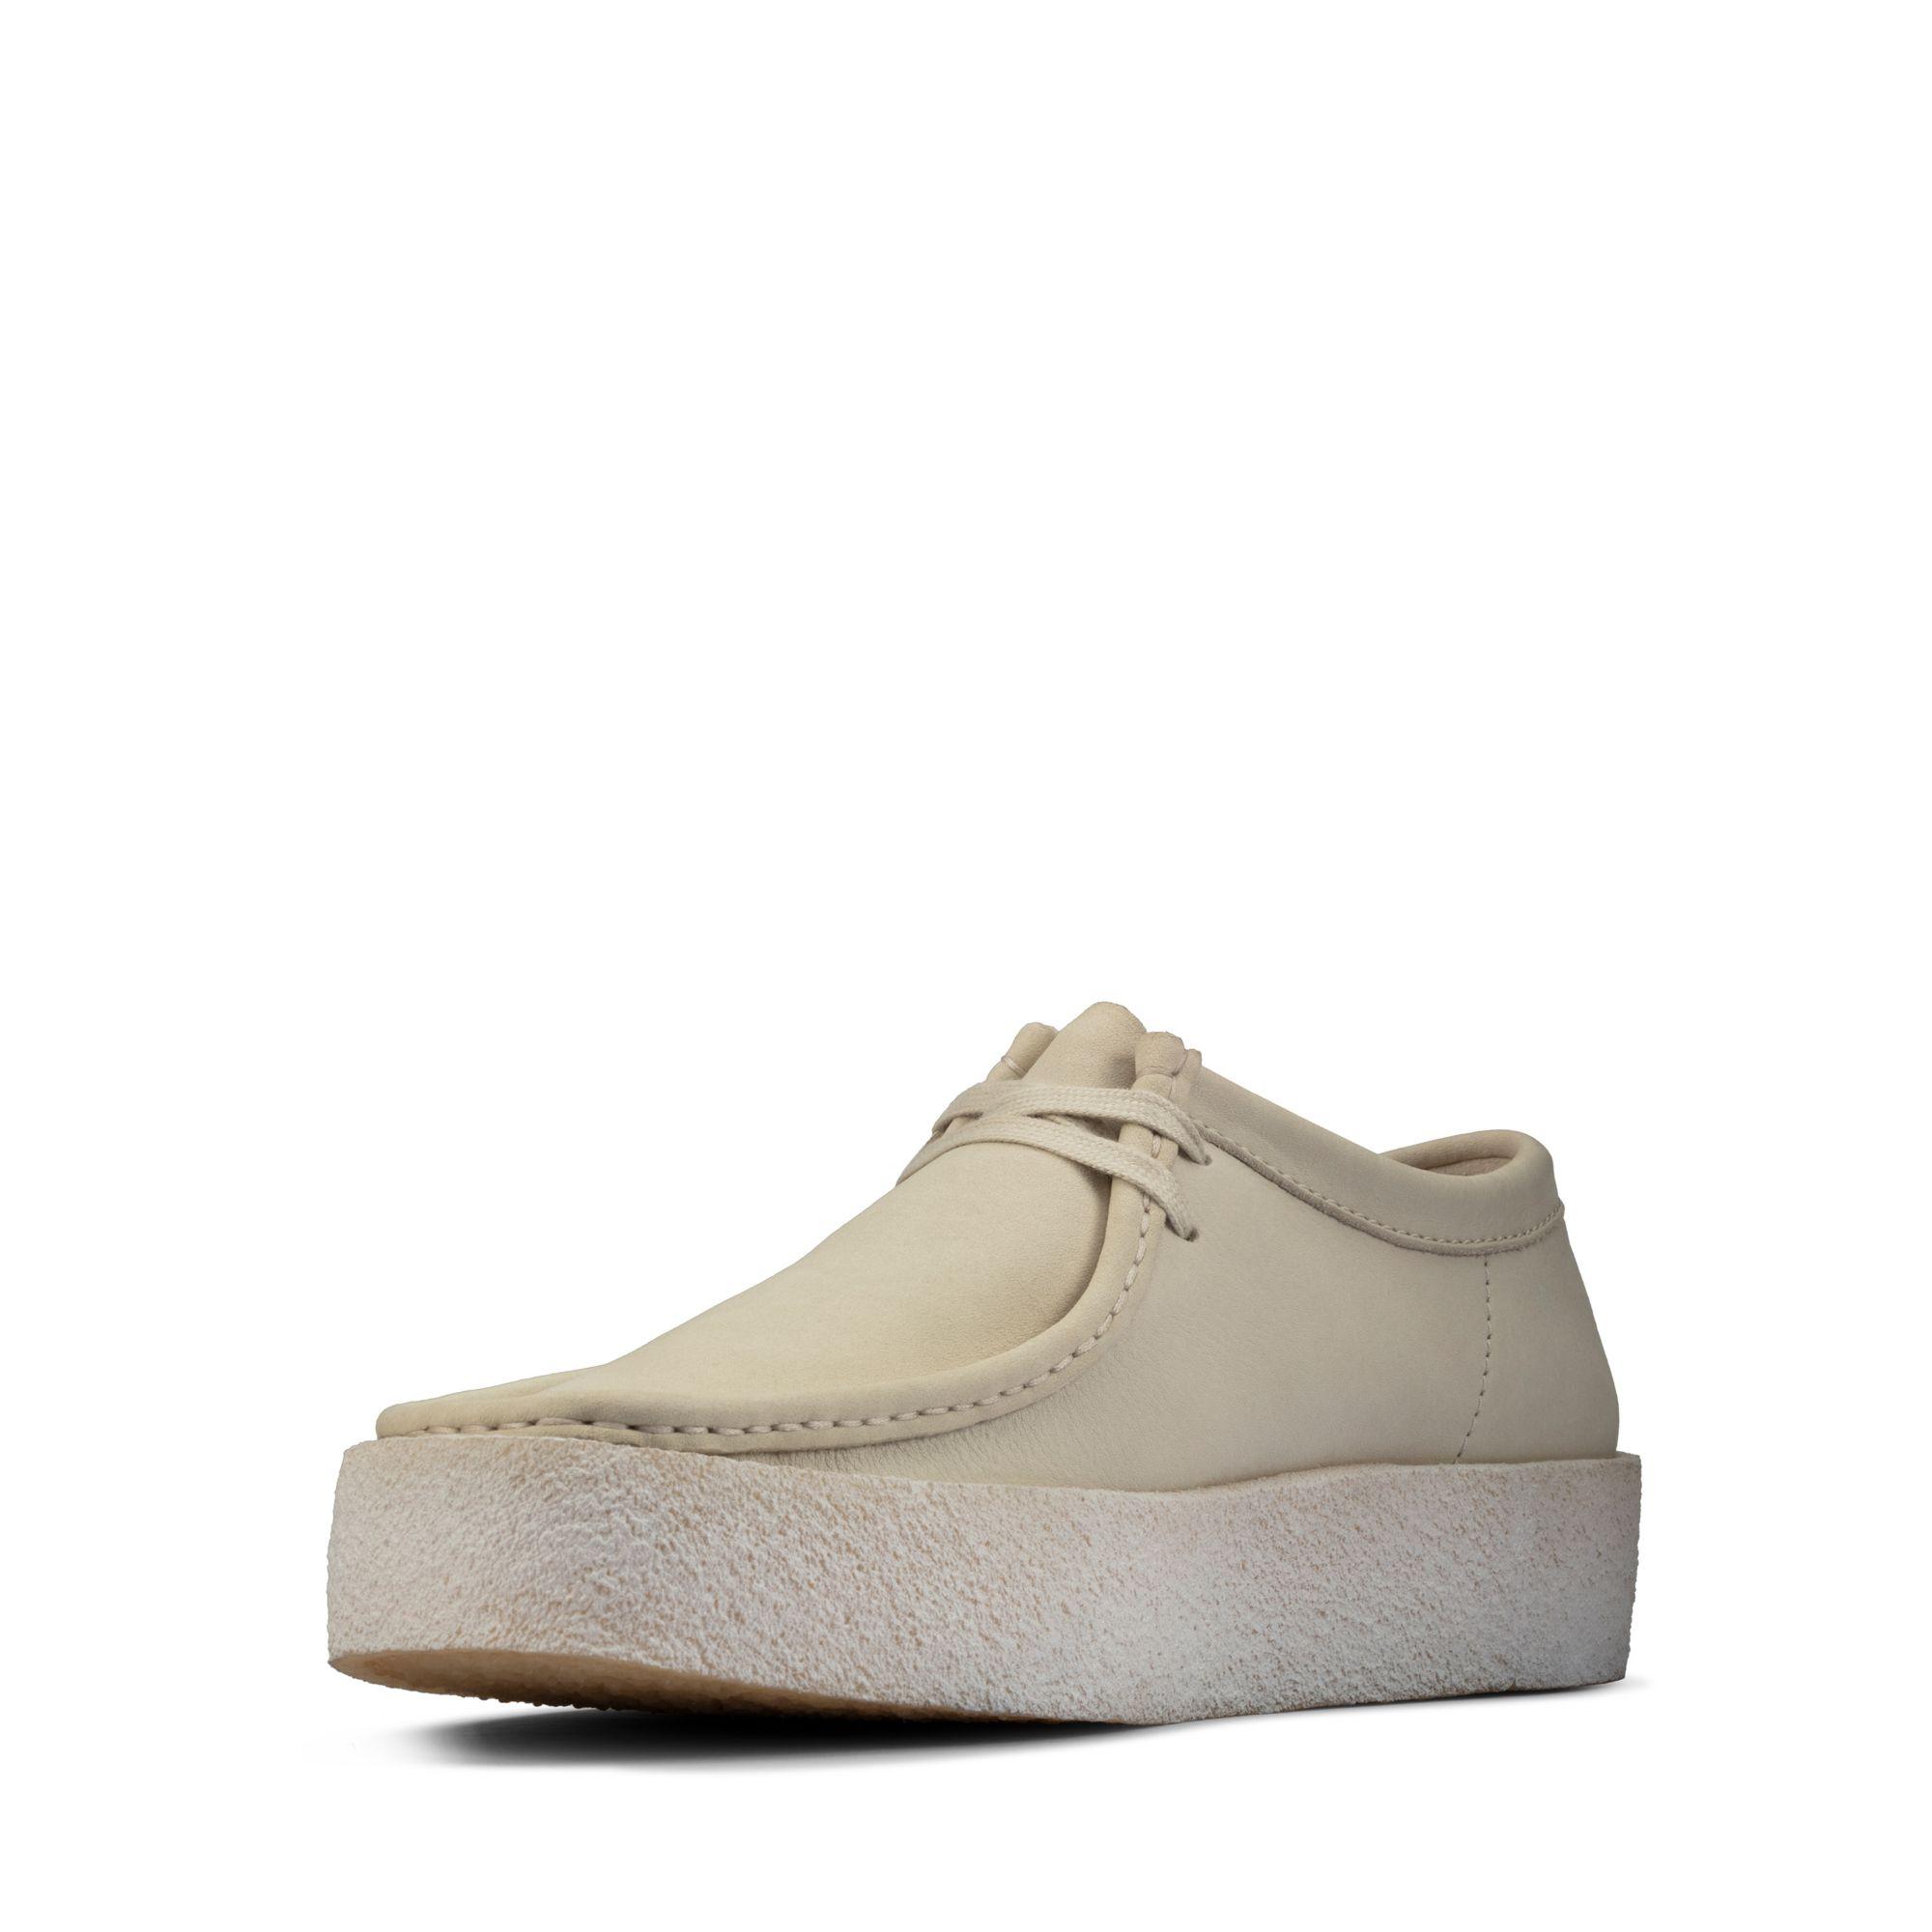 Clarks Wallabee Cup in White Nubuck (White) for Men - Lyst